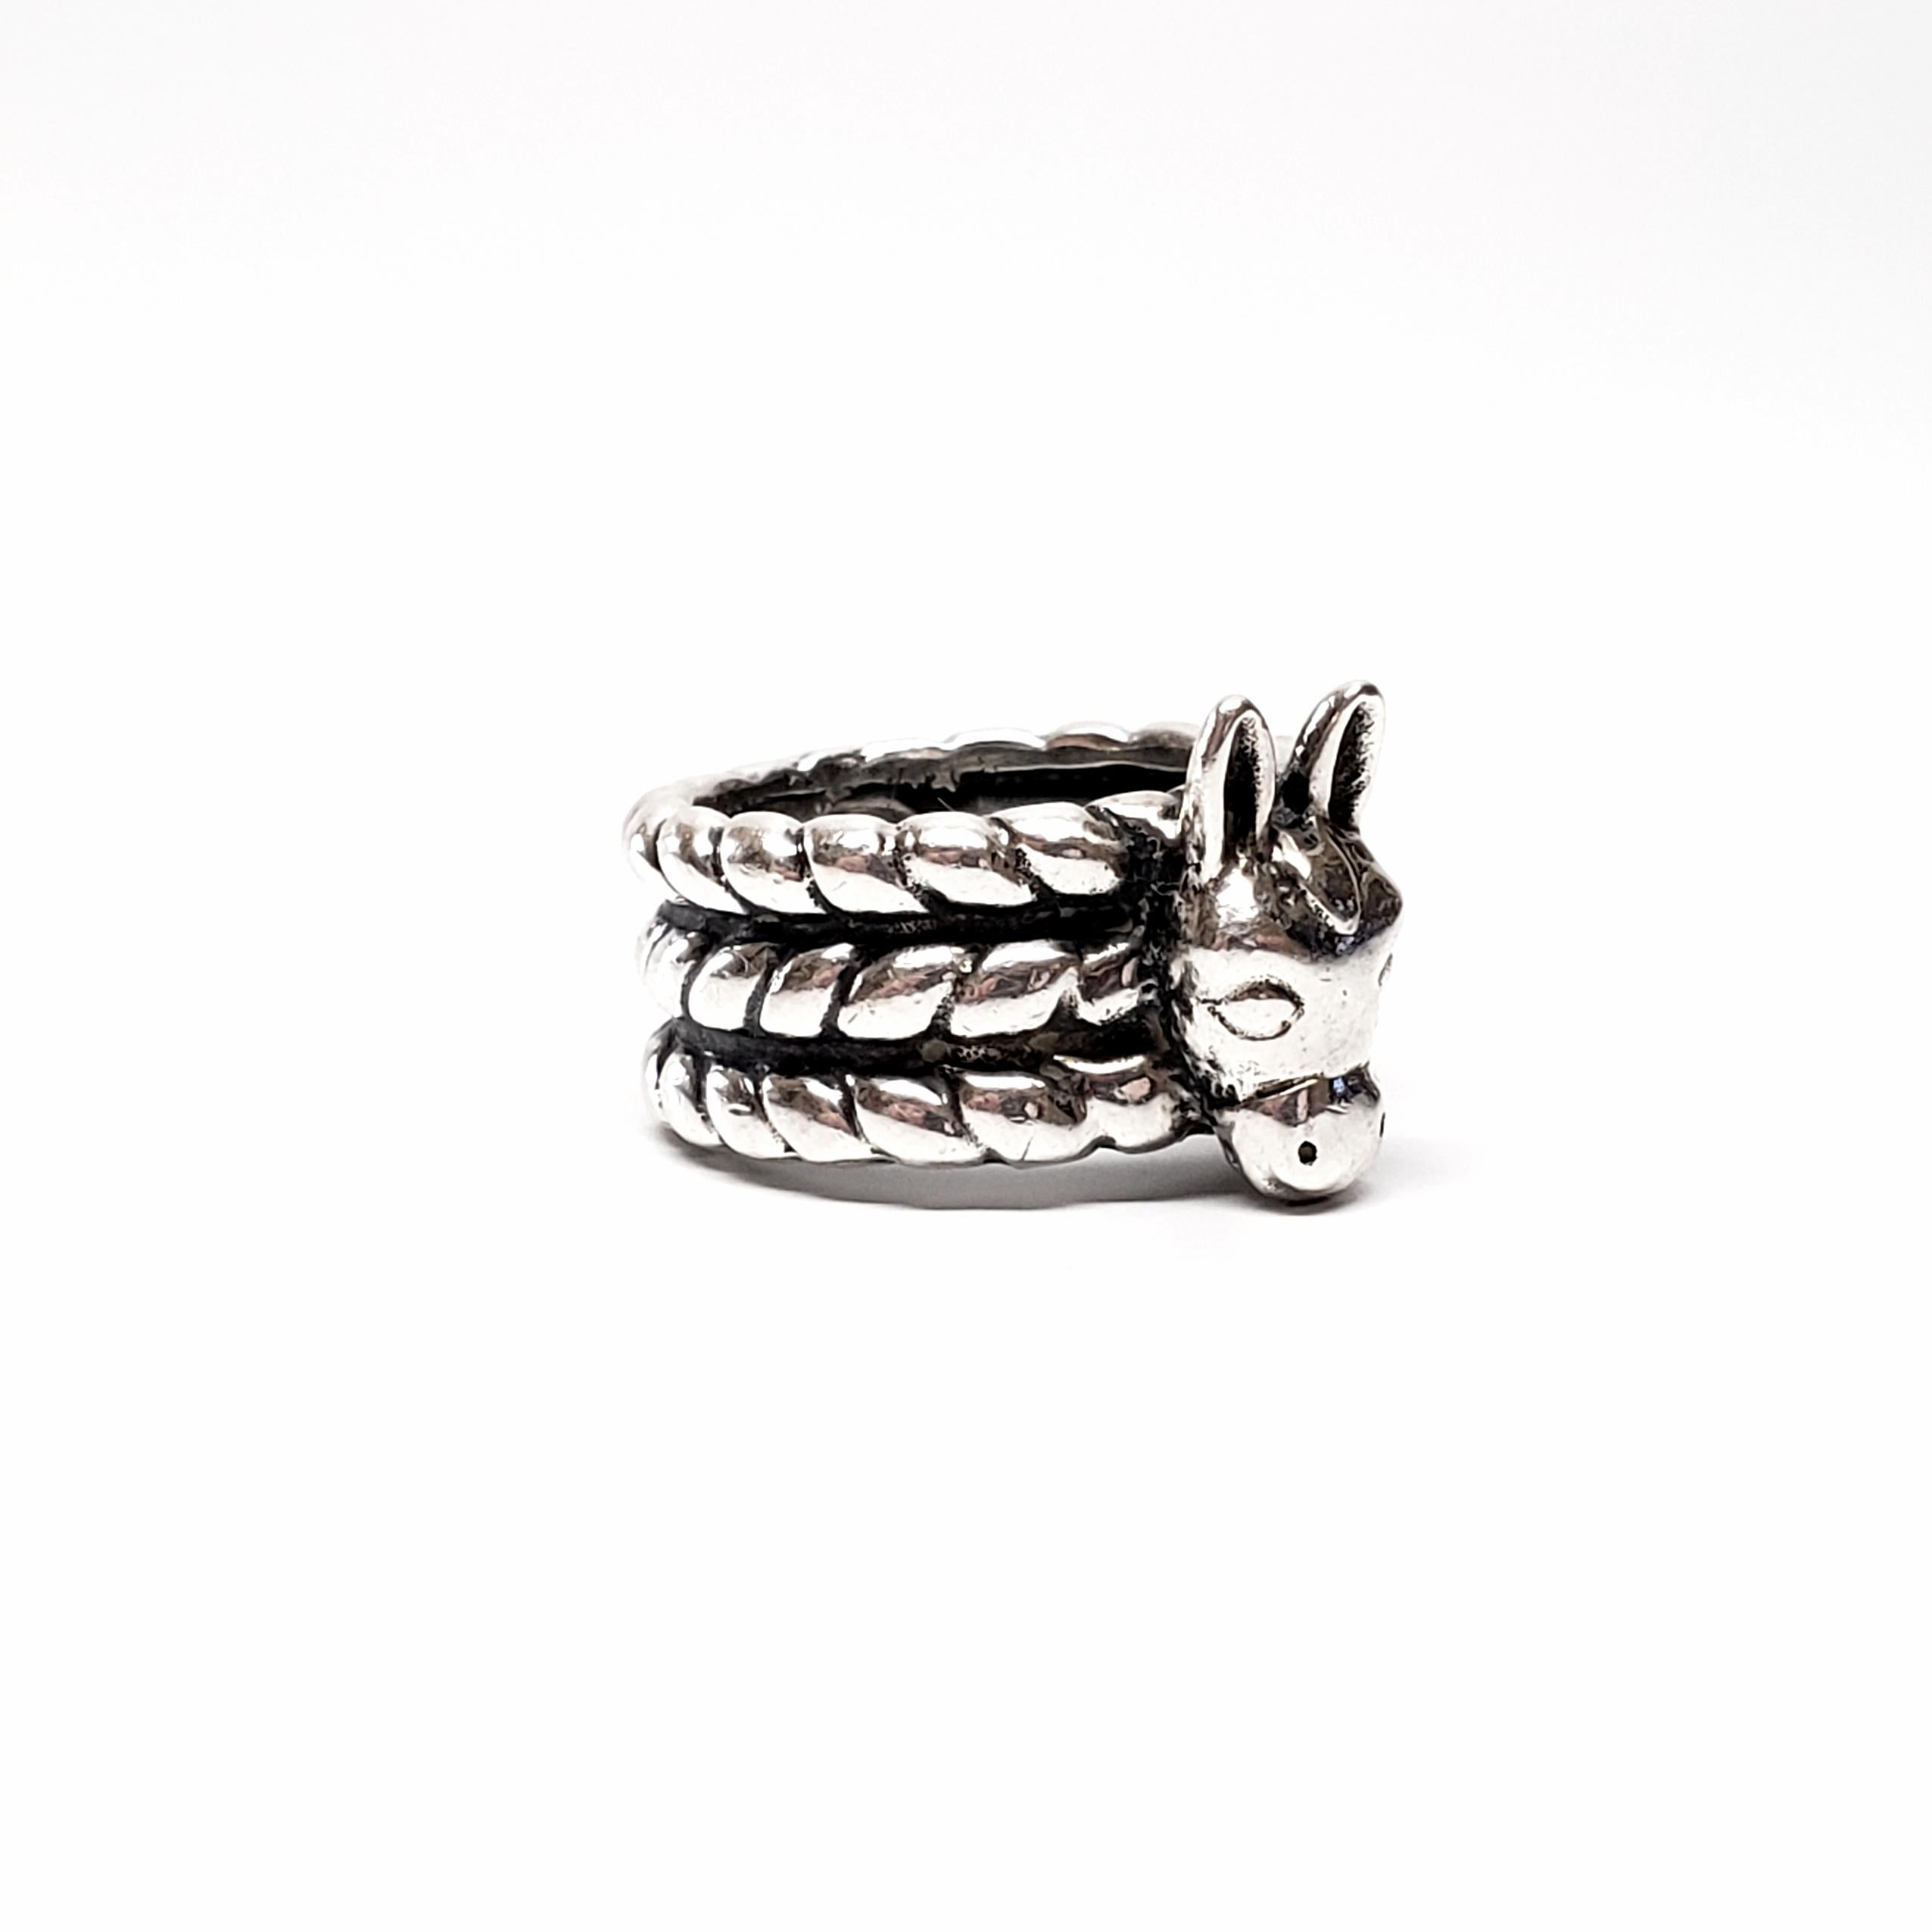 Sterling silver Texas Donkey ring by Dian Malouf.

Size 5 3/4

Dian Malouf is known for her bold design of silver and gold jewelry. Often her pieces are instantly recognizable. This vintage piece features a donkey head on a wide tri-rope band.

Band